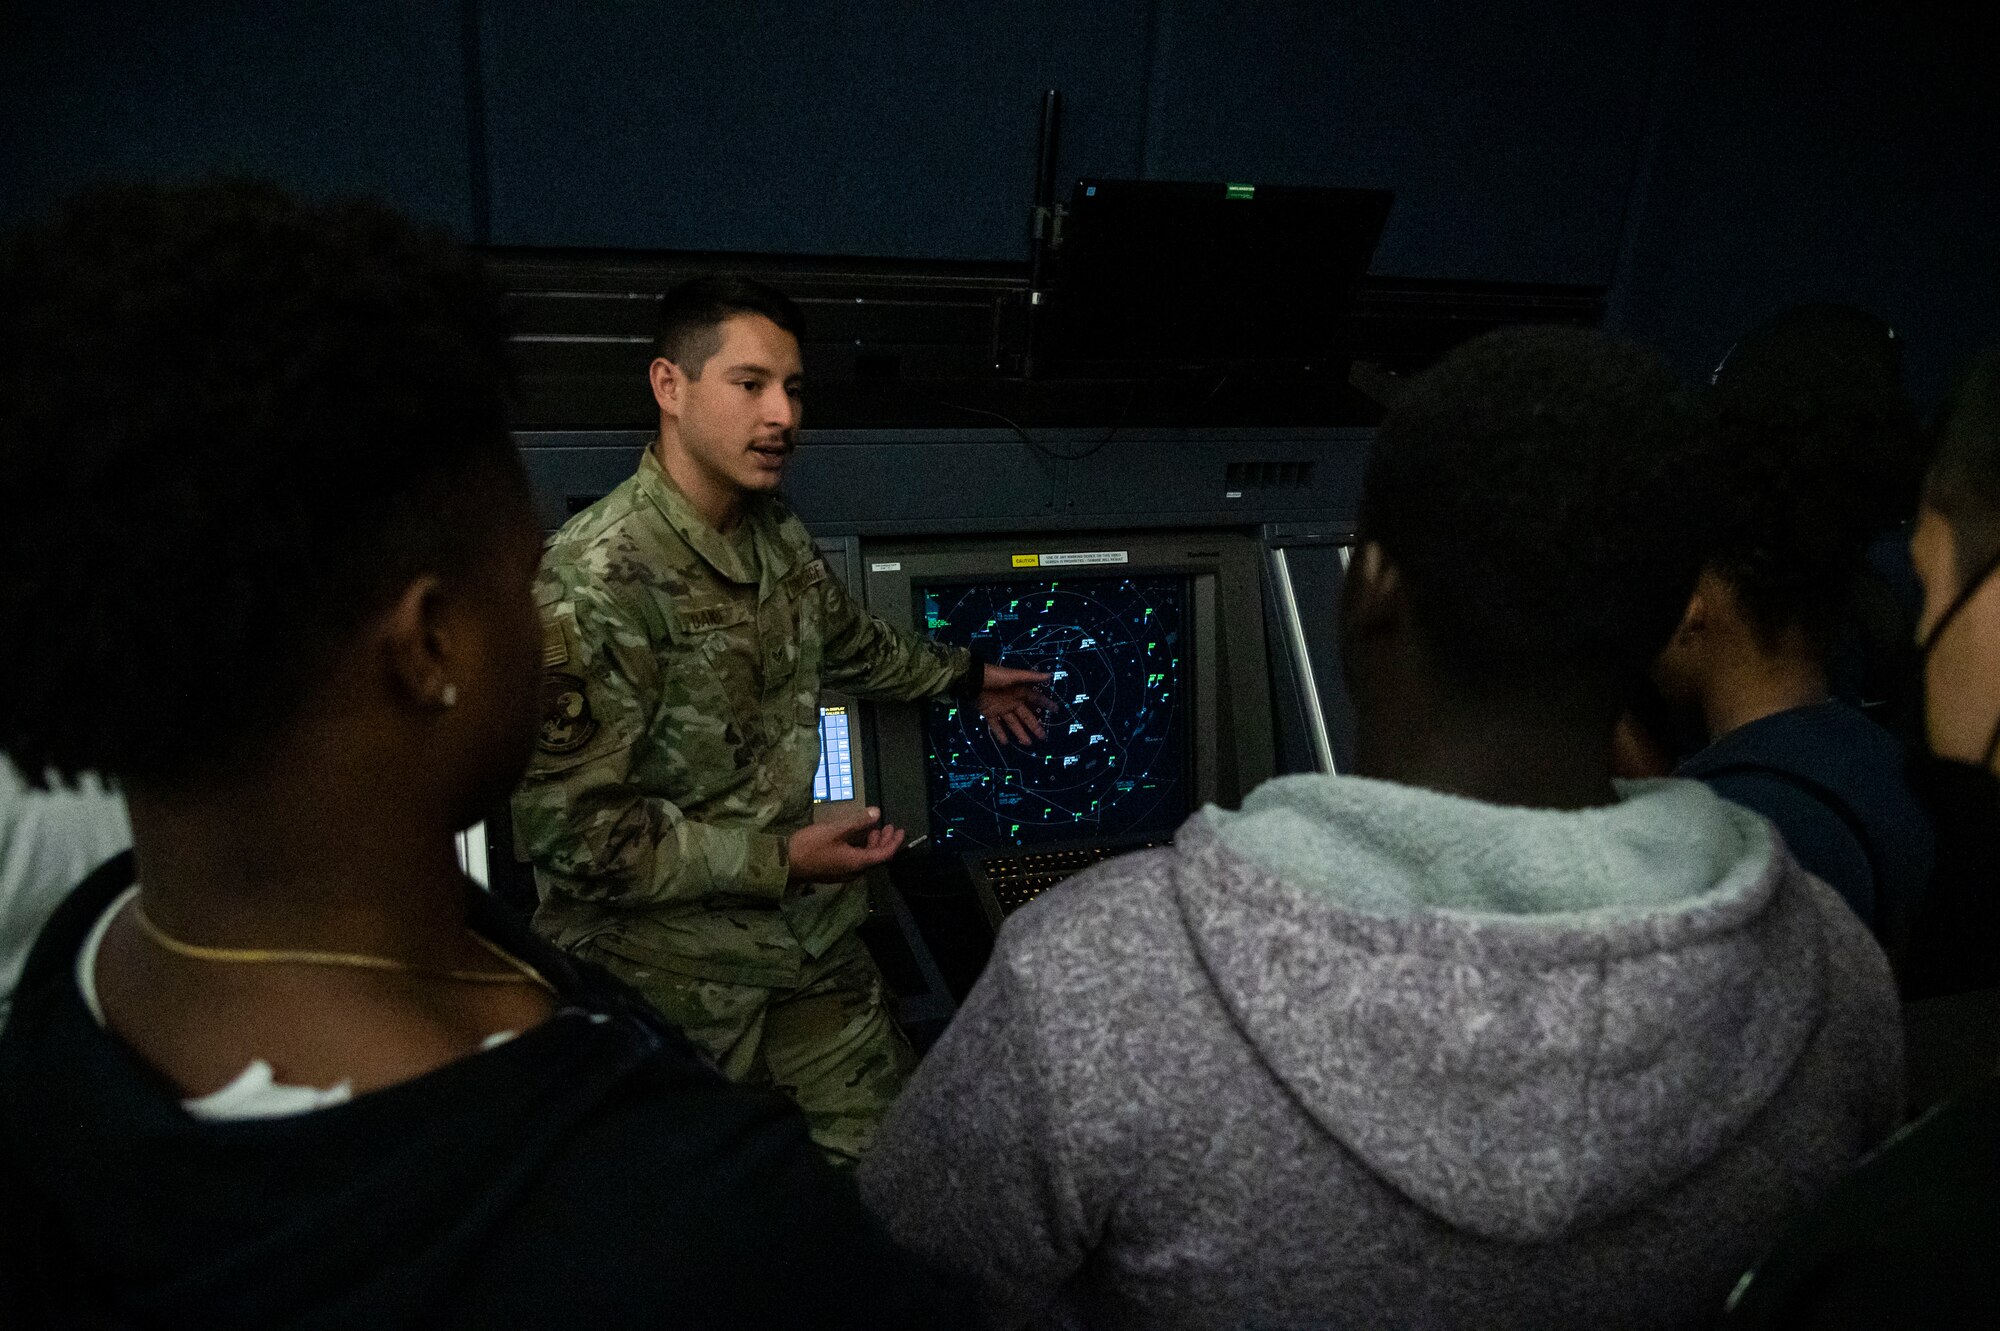 Senior Airman Zachary Bande, 436th Operations Support Squadron air traffic control journeyman, shows a flight radar to students from the Organization of Black Aerospace Professionals during an immersion tour at Dover Air Force Base, Delaware, June 21, 2022. OBAP’s mission is to inspire excellence and provide opportunities in aerospace by supporting, transforming, educating and mentoring members and communities. (U.S. Air Force photo by Staff Sgt. Marco A. Gomez)